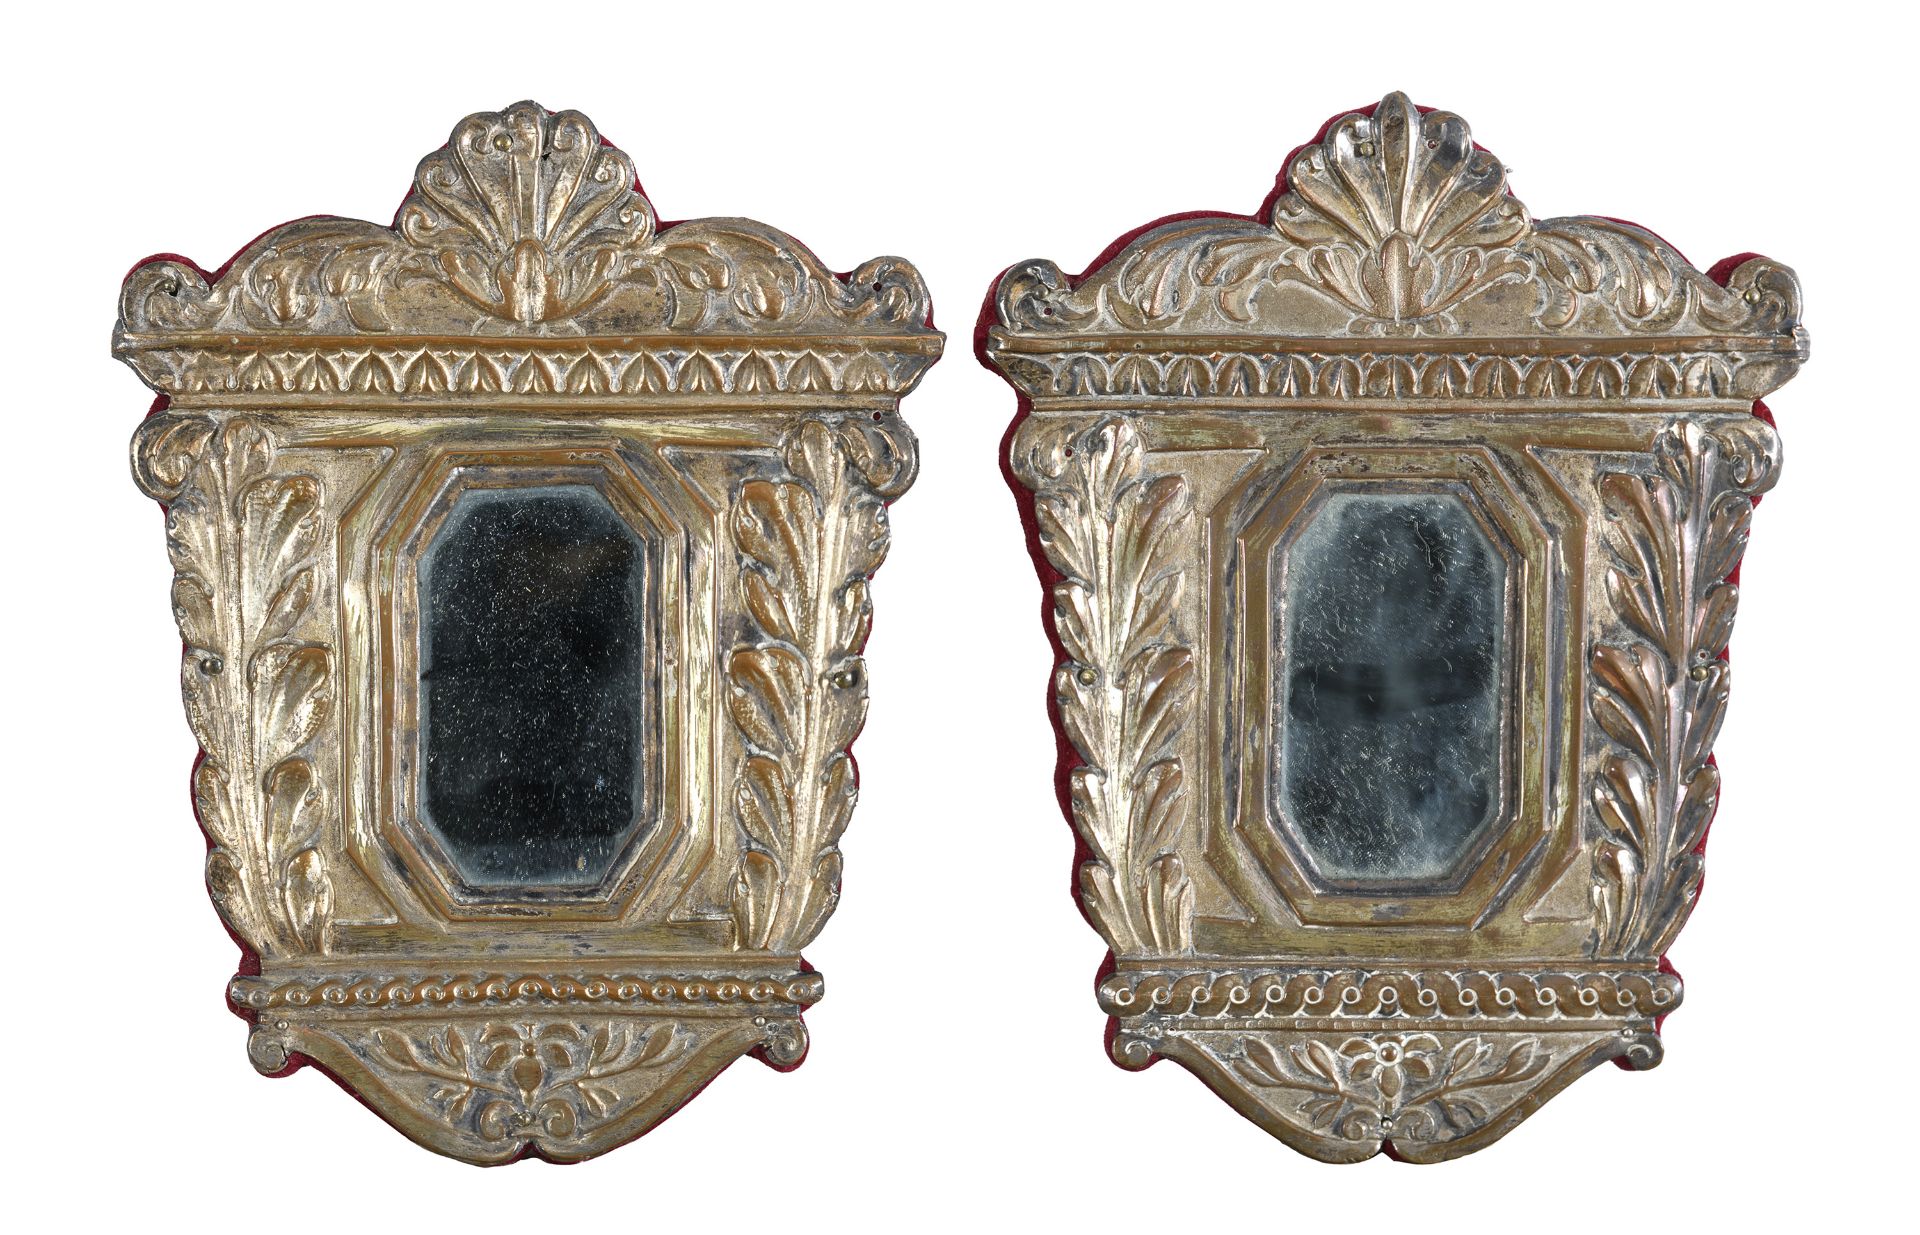 PAIR OF SILVER-PLATED COPPER MIRRORS END OF THE 18TH CENTURY